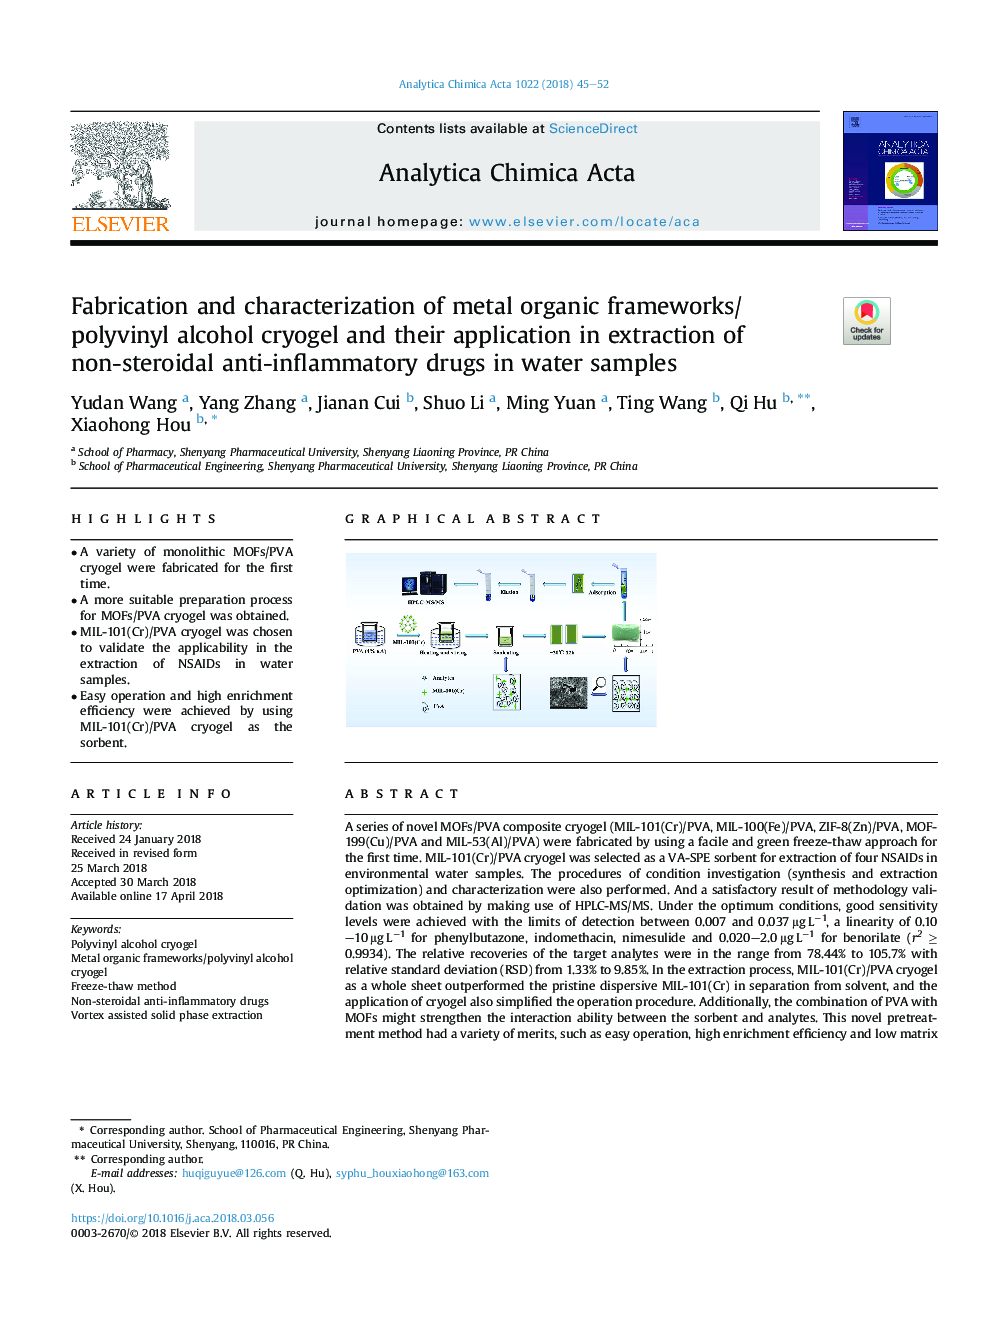 Fabrication and characterization of metal organic frameworks/ polyvinyl alcohol cryogel and their application in extraction of non-steroidal anti-inflammatory drugs in water samples